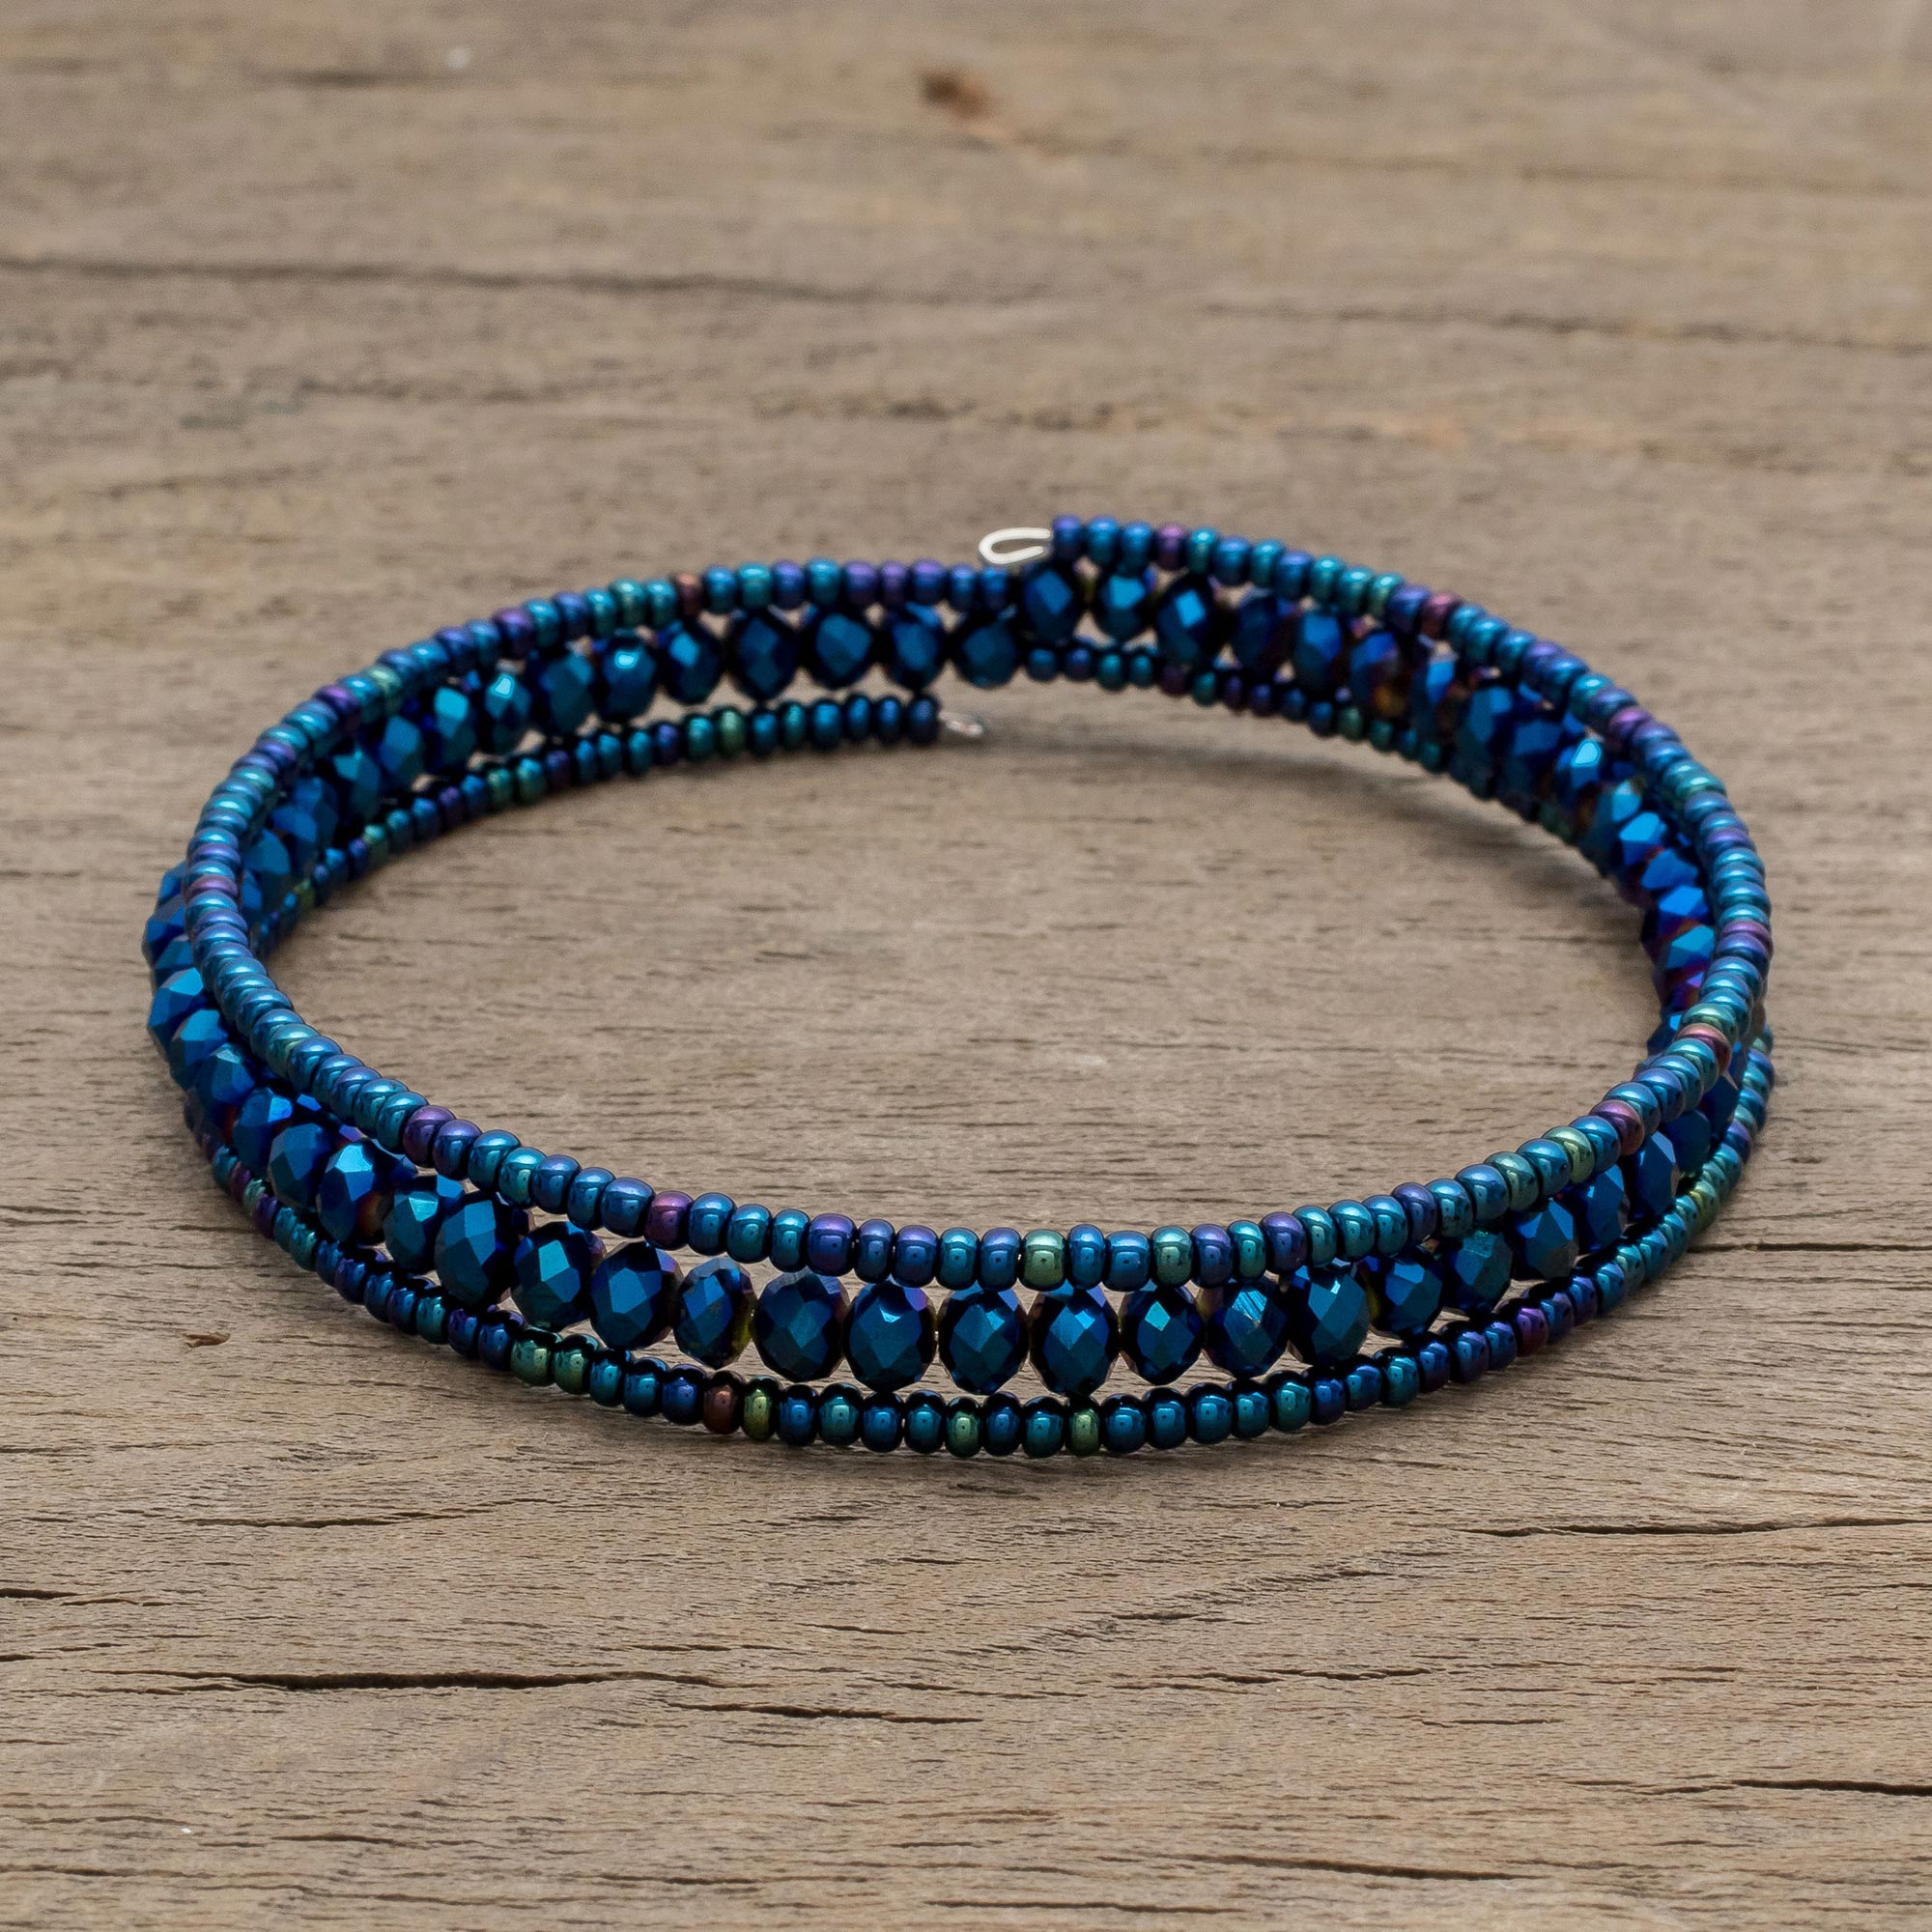 Crystal and Glass Beaded Wrap Bracelet in Blue - Glamorous Moon